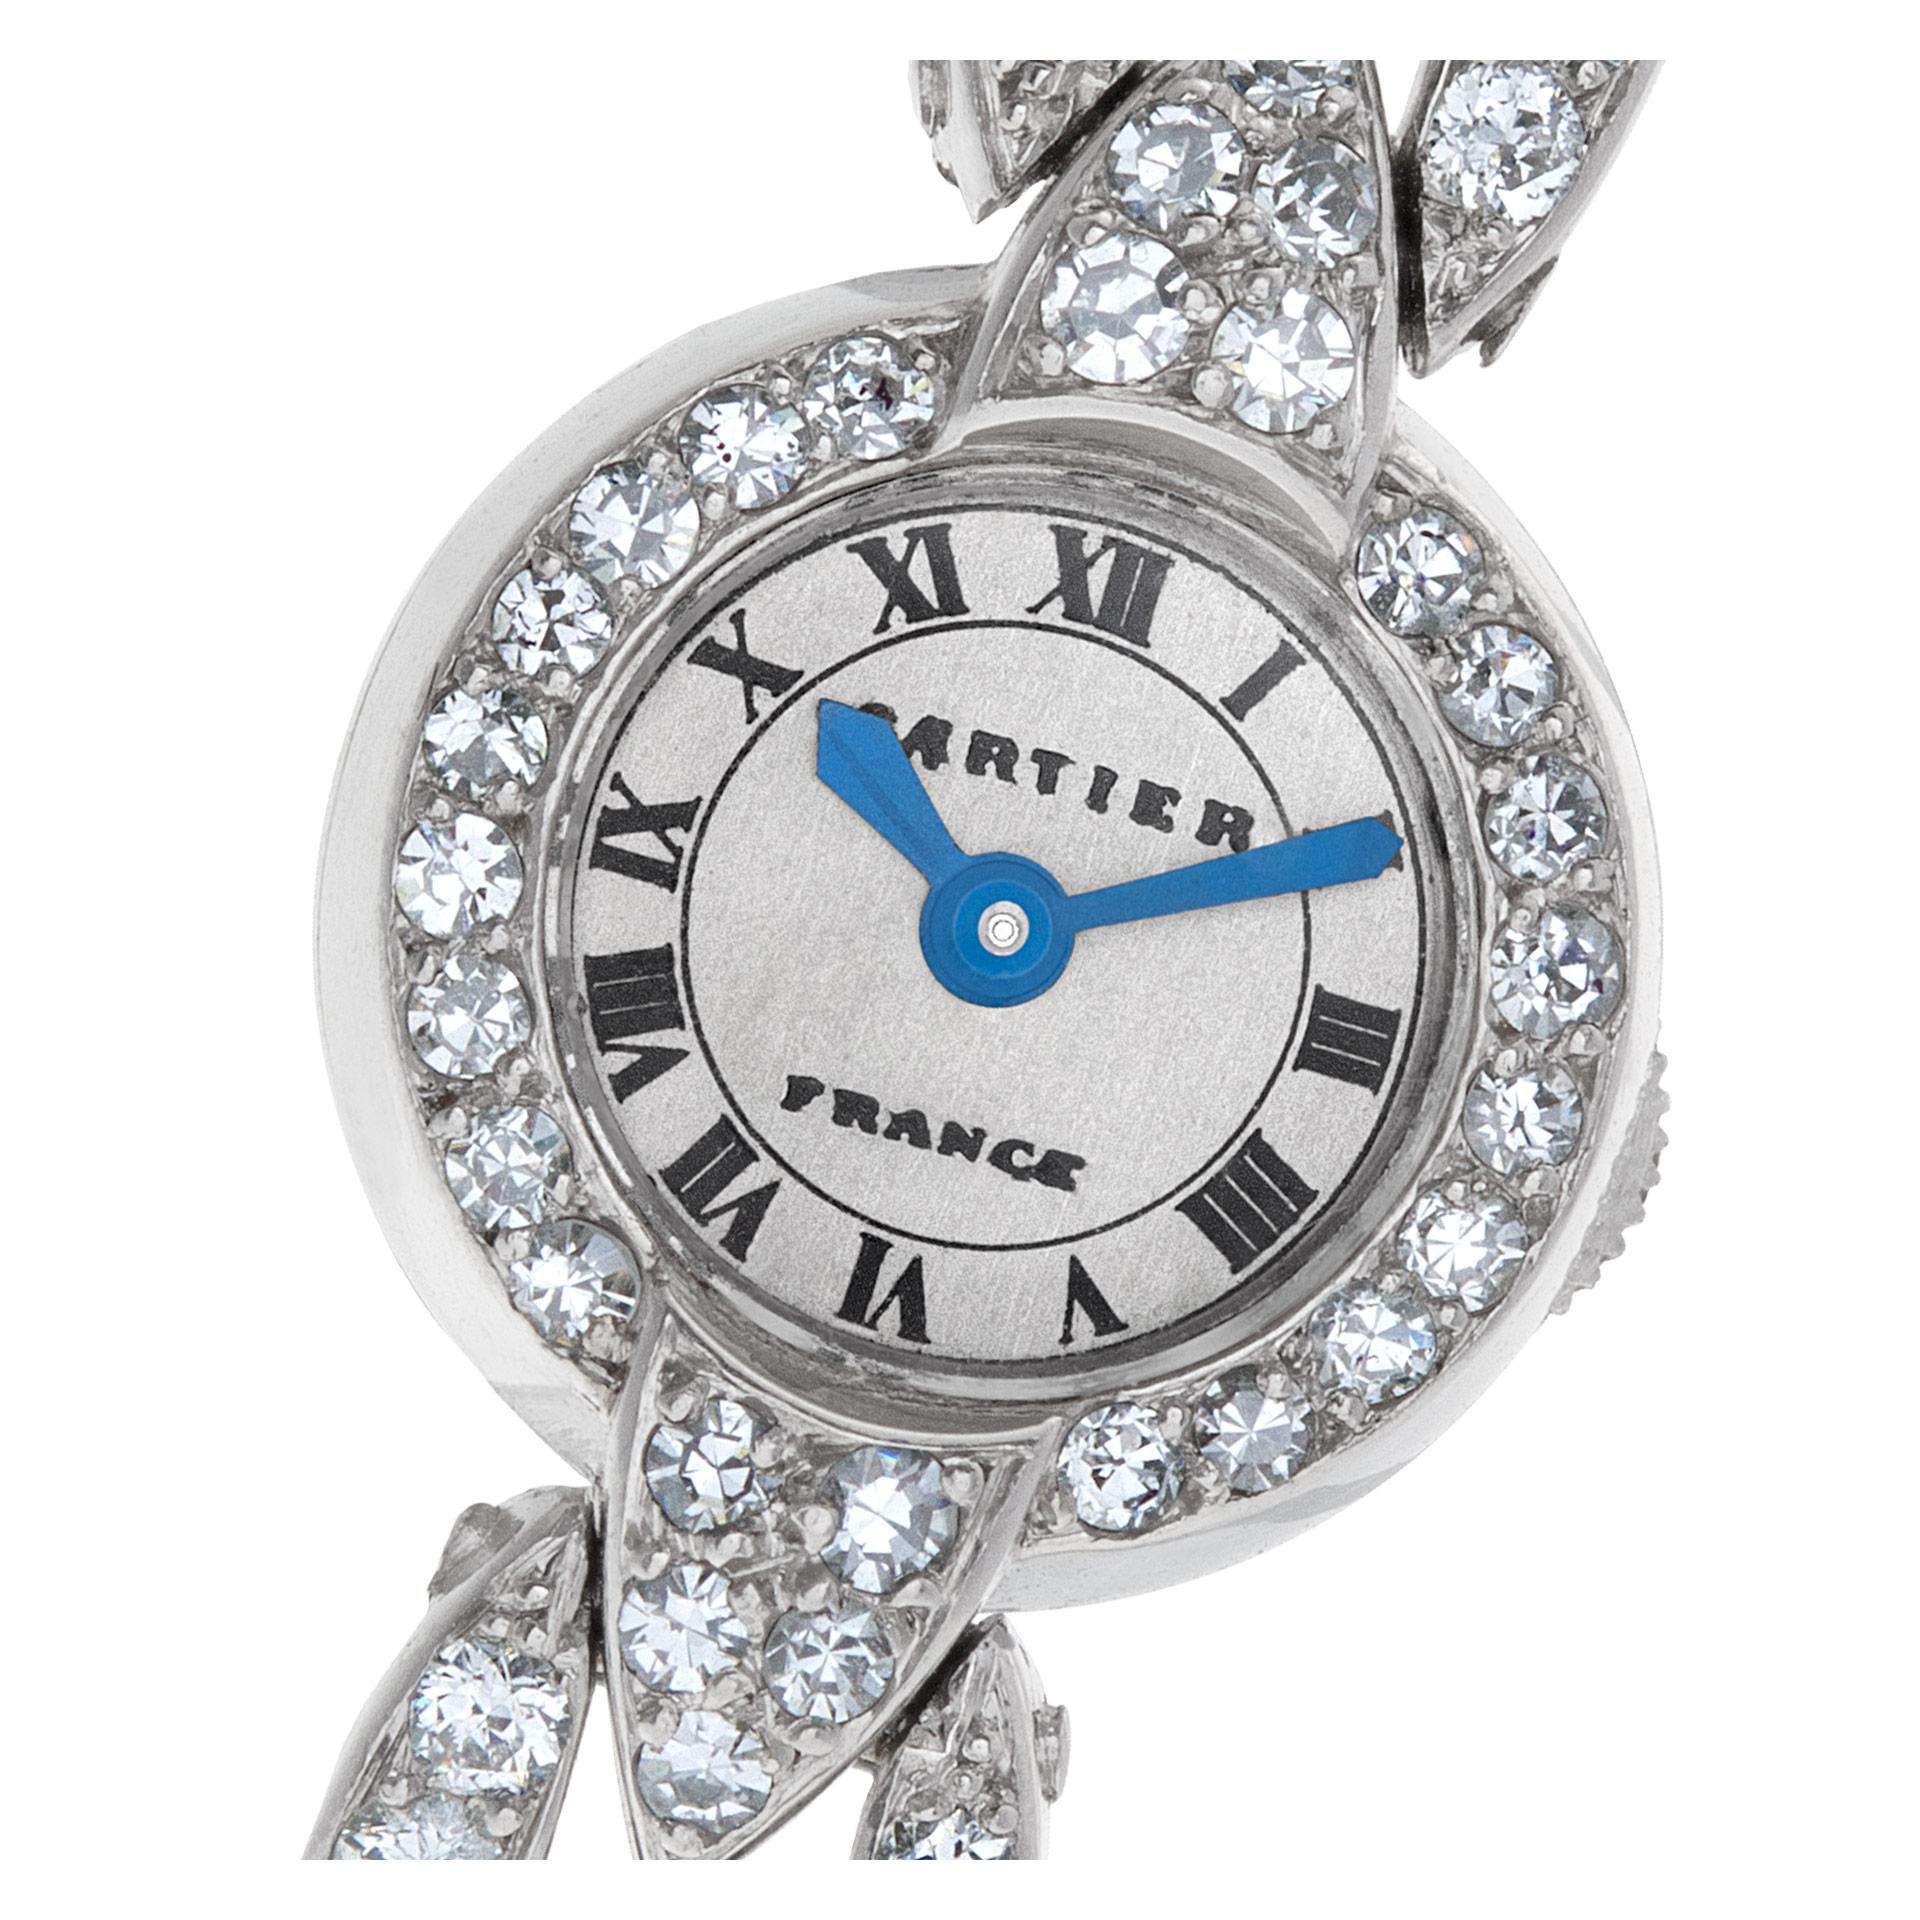 ESTIMATED RETAIL $85000.00 YOUR PRICE $48900.00 Very fine, rare & elegant Cartier European Watch & Clock Co. Art Deco cocktail watch in platinum set with approximately 4.50 carats in bright diamonds. 16 jewels. Manual back wind & set. With original